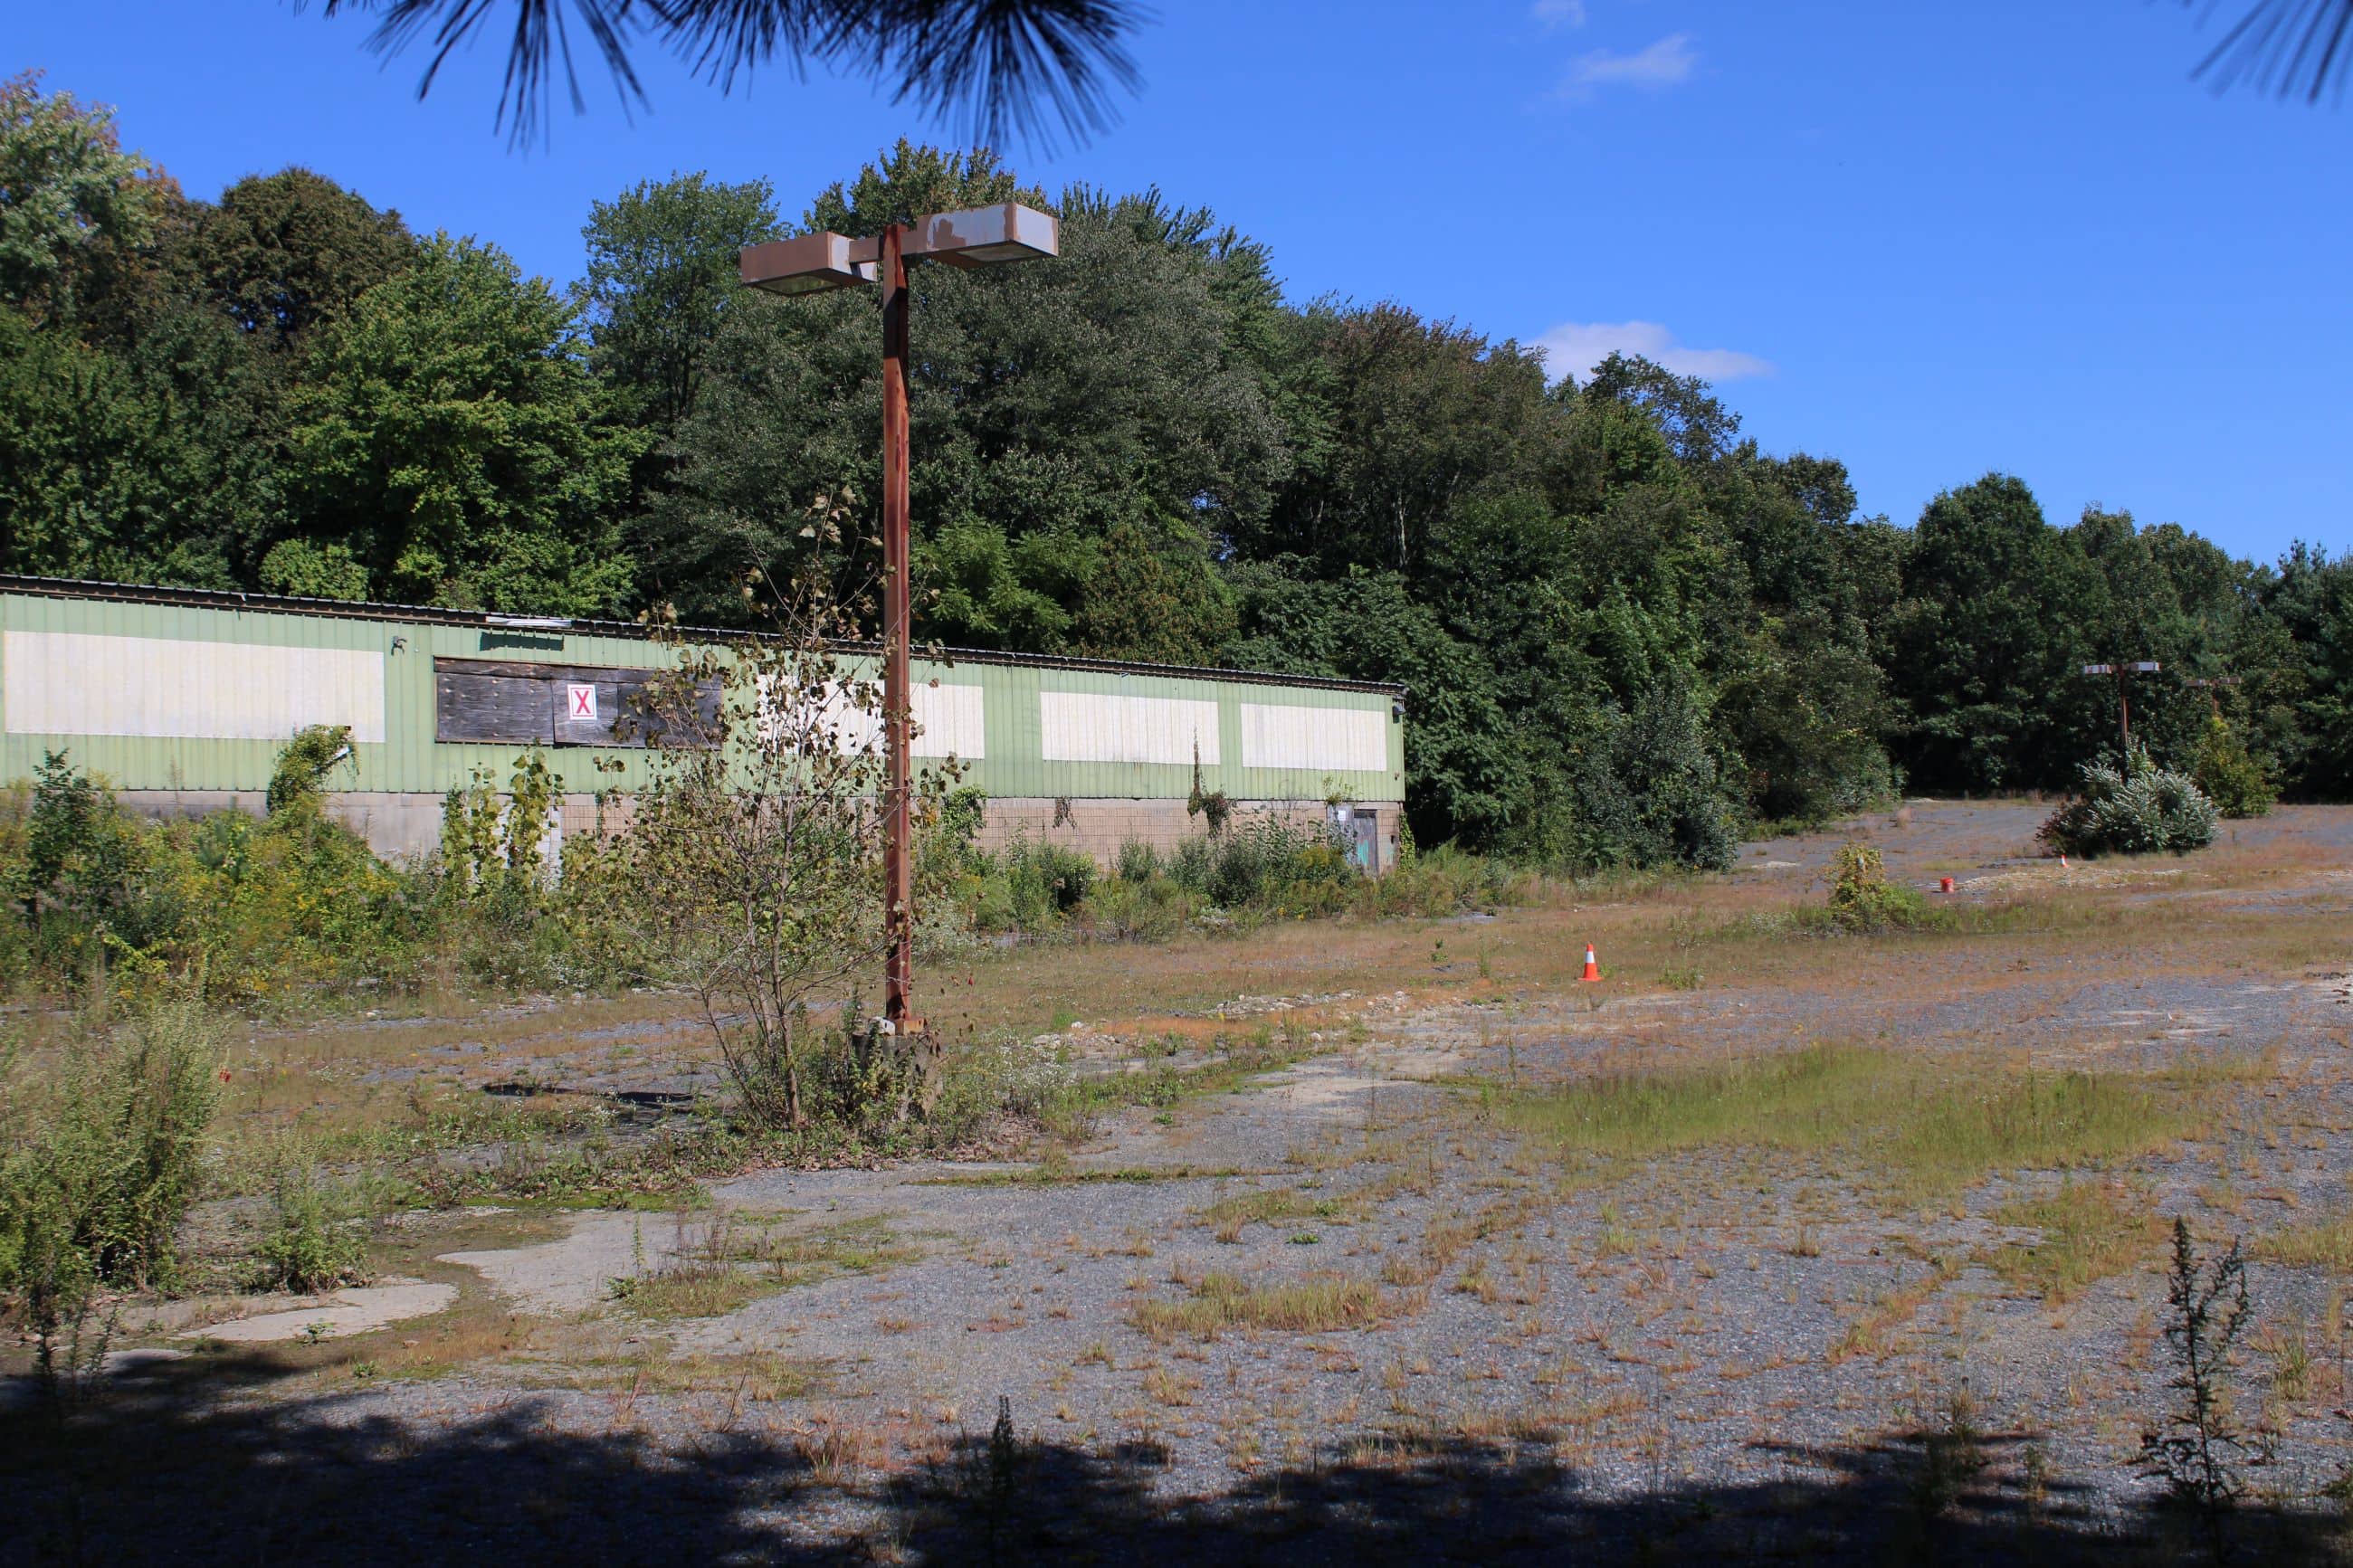 One-time Westborough rink could be converted into a self-storage facility